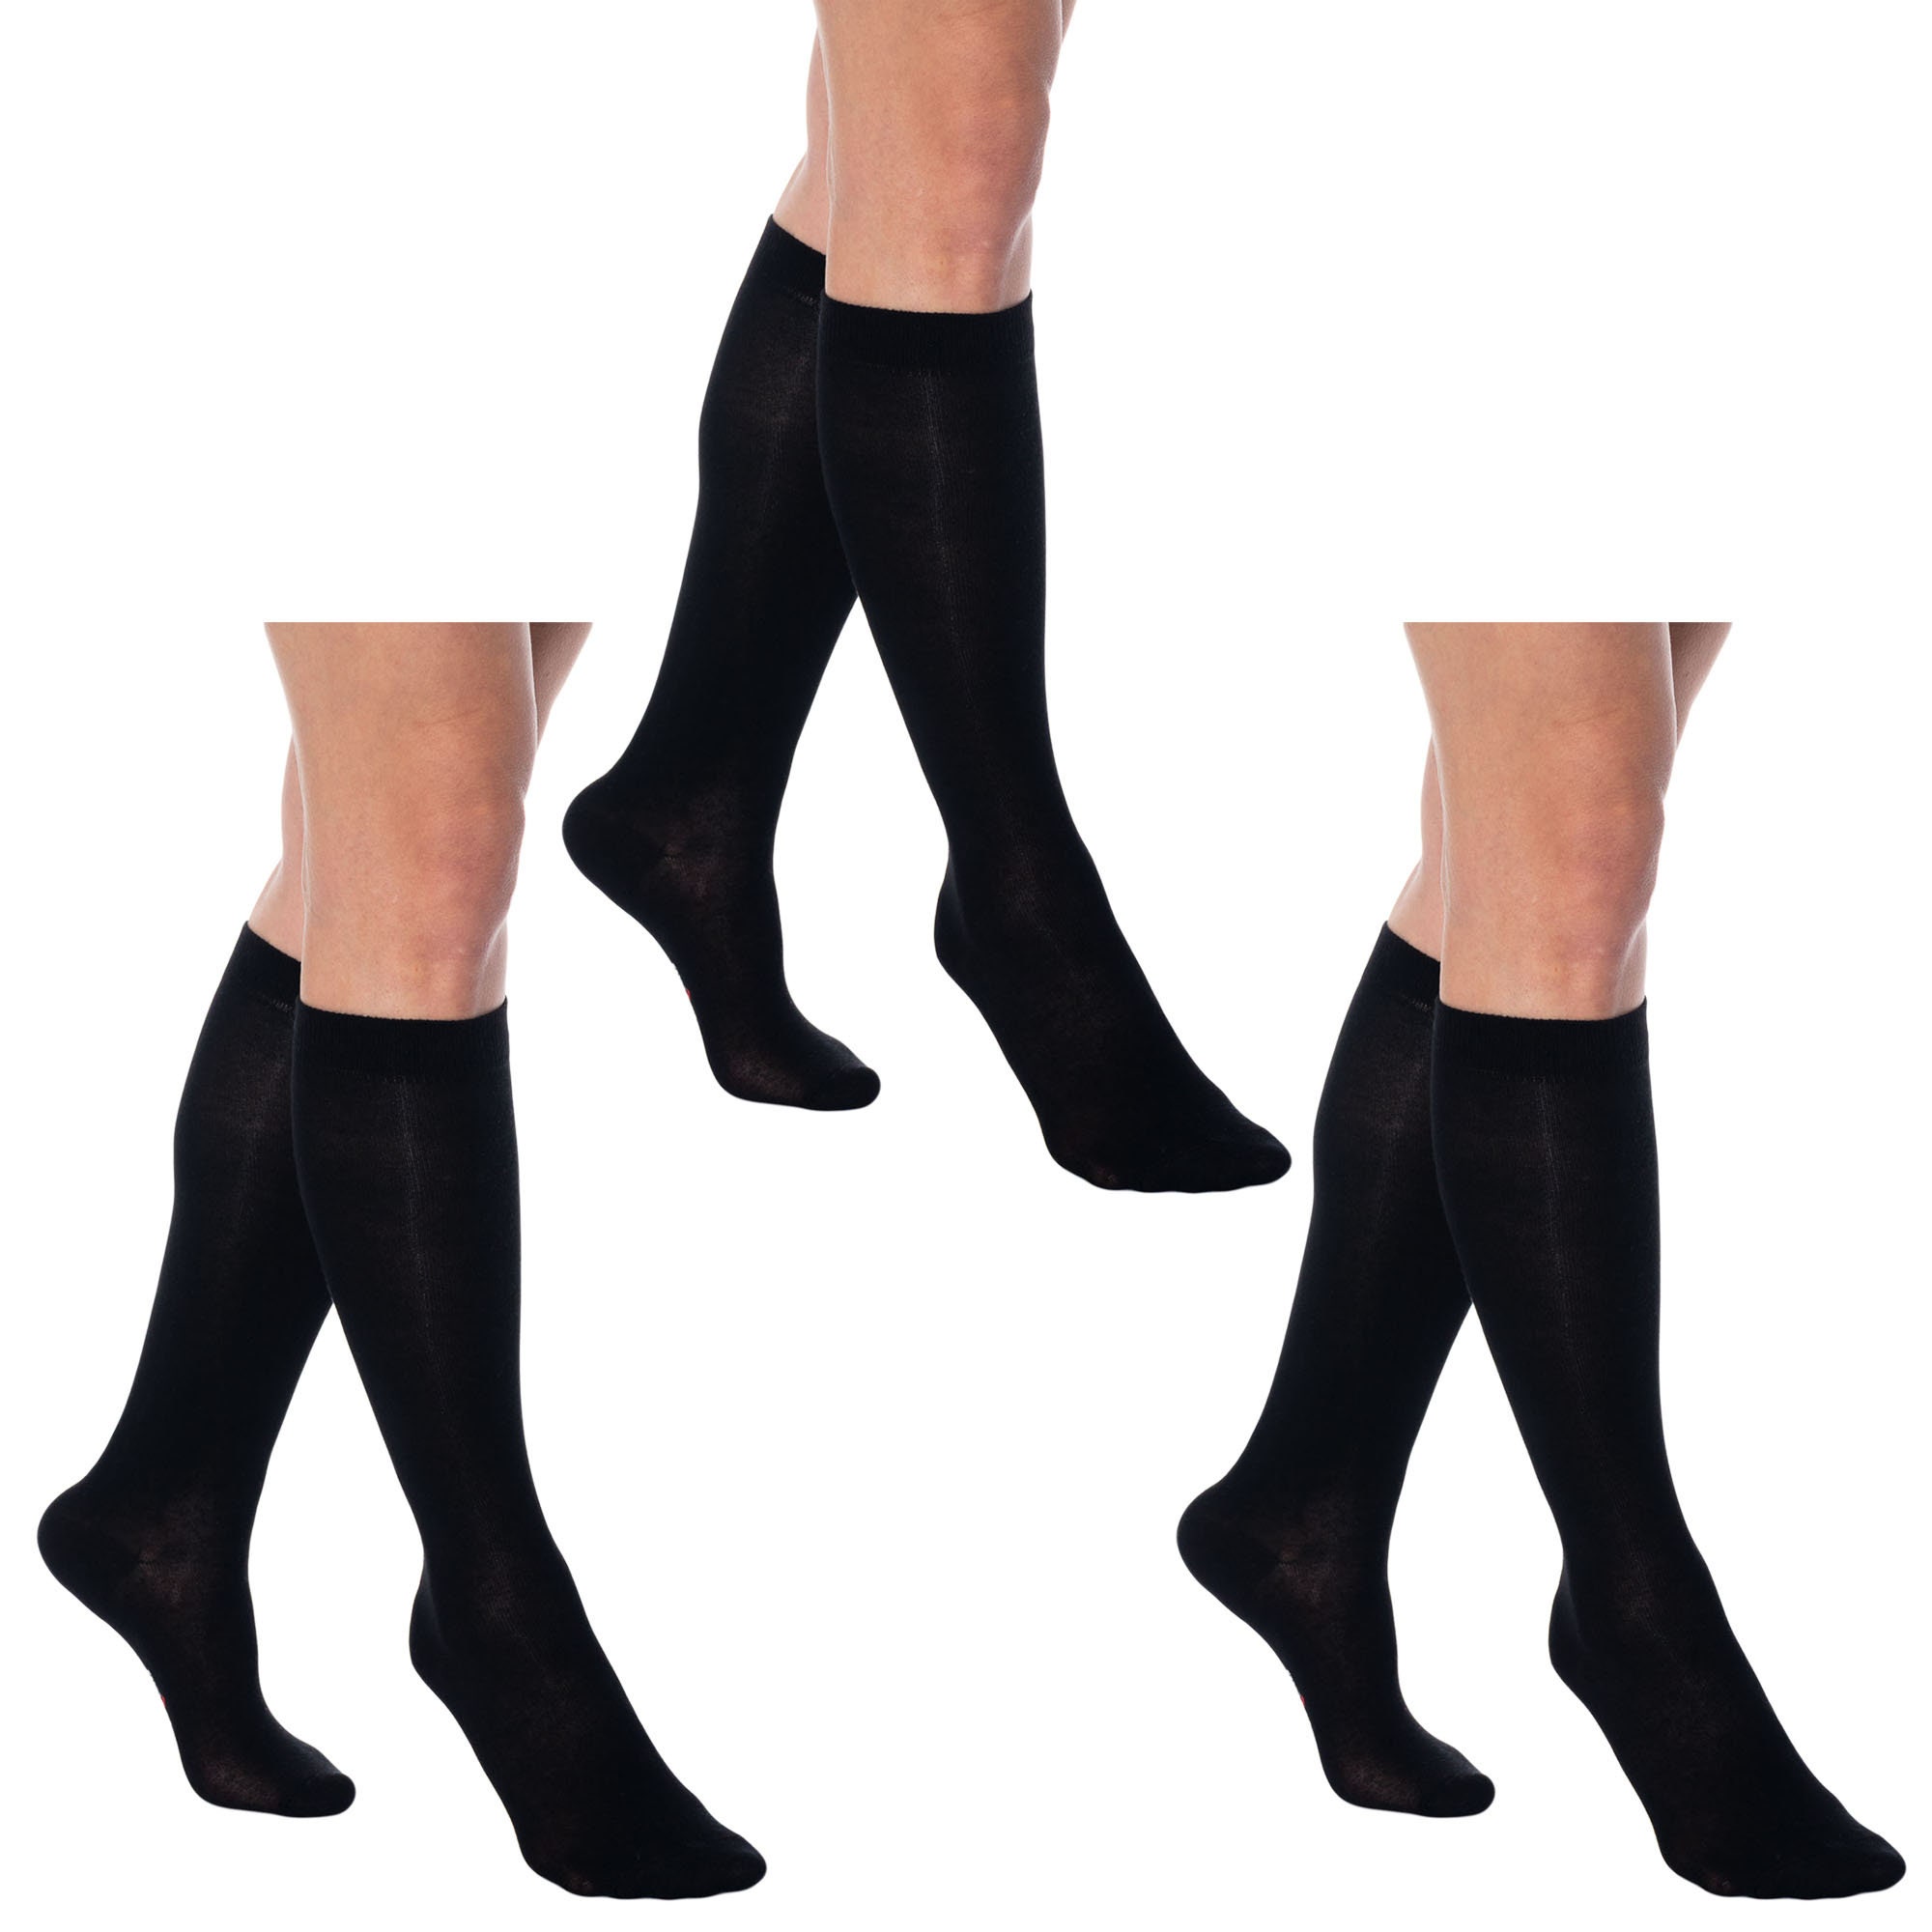 Hugh Ugoli Socks  Hugh Ugoli Knee High Trouser Socks Bamboo Solid Color  Unmatched Quality and Craftsmanship These vibrant womens socks come in a  wide range of great colors and are crafted